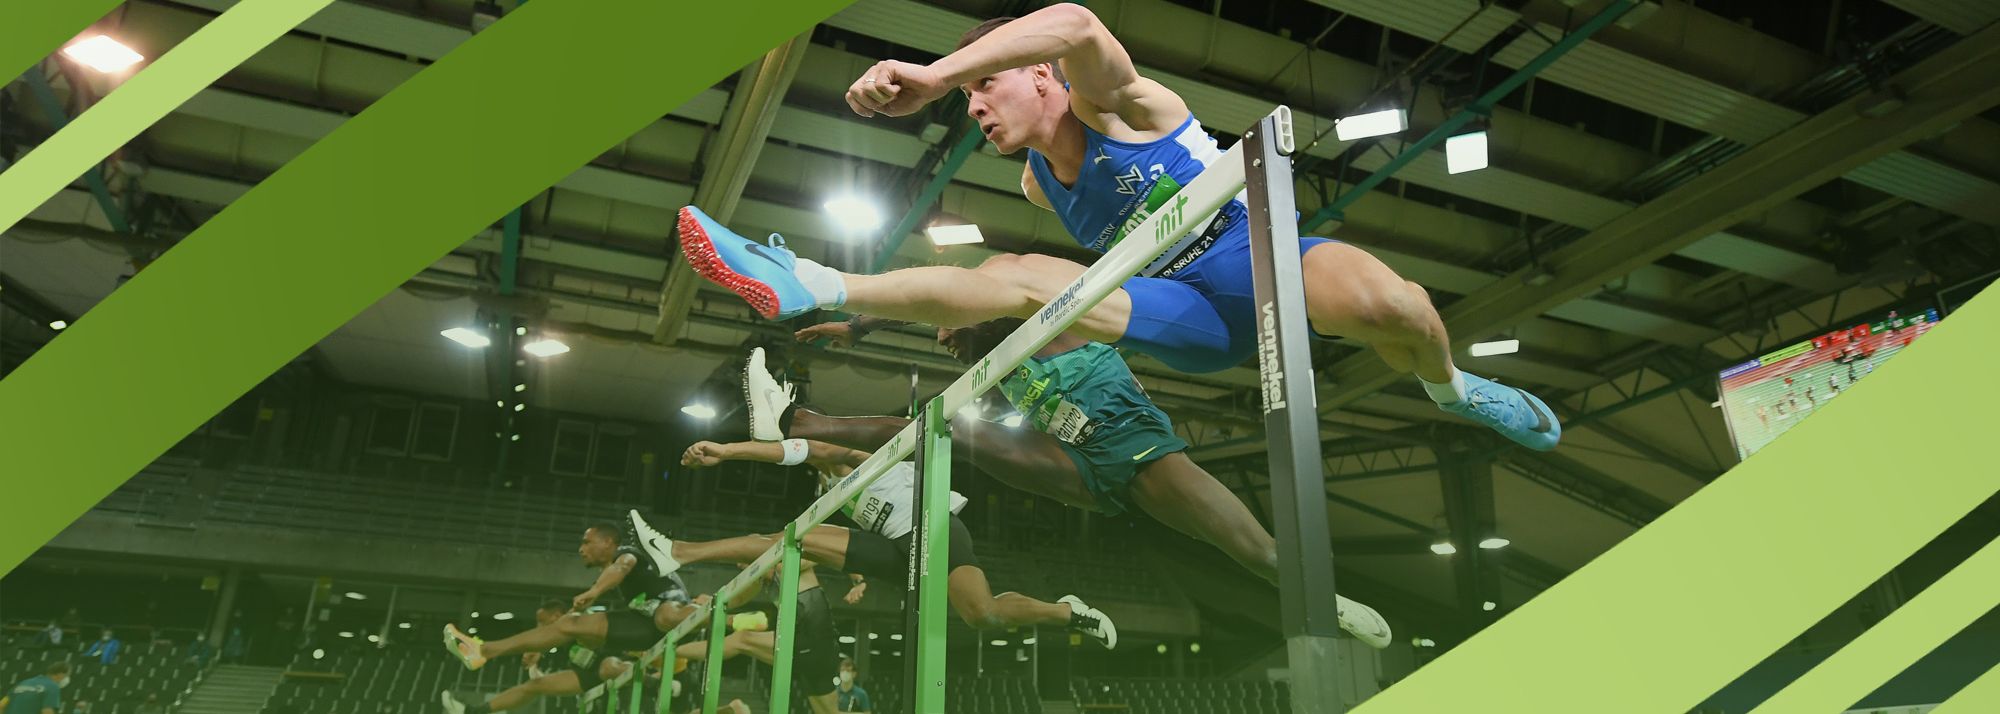 Catch all the action from the Init Indoor Meeting Karlsruhe